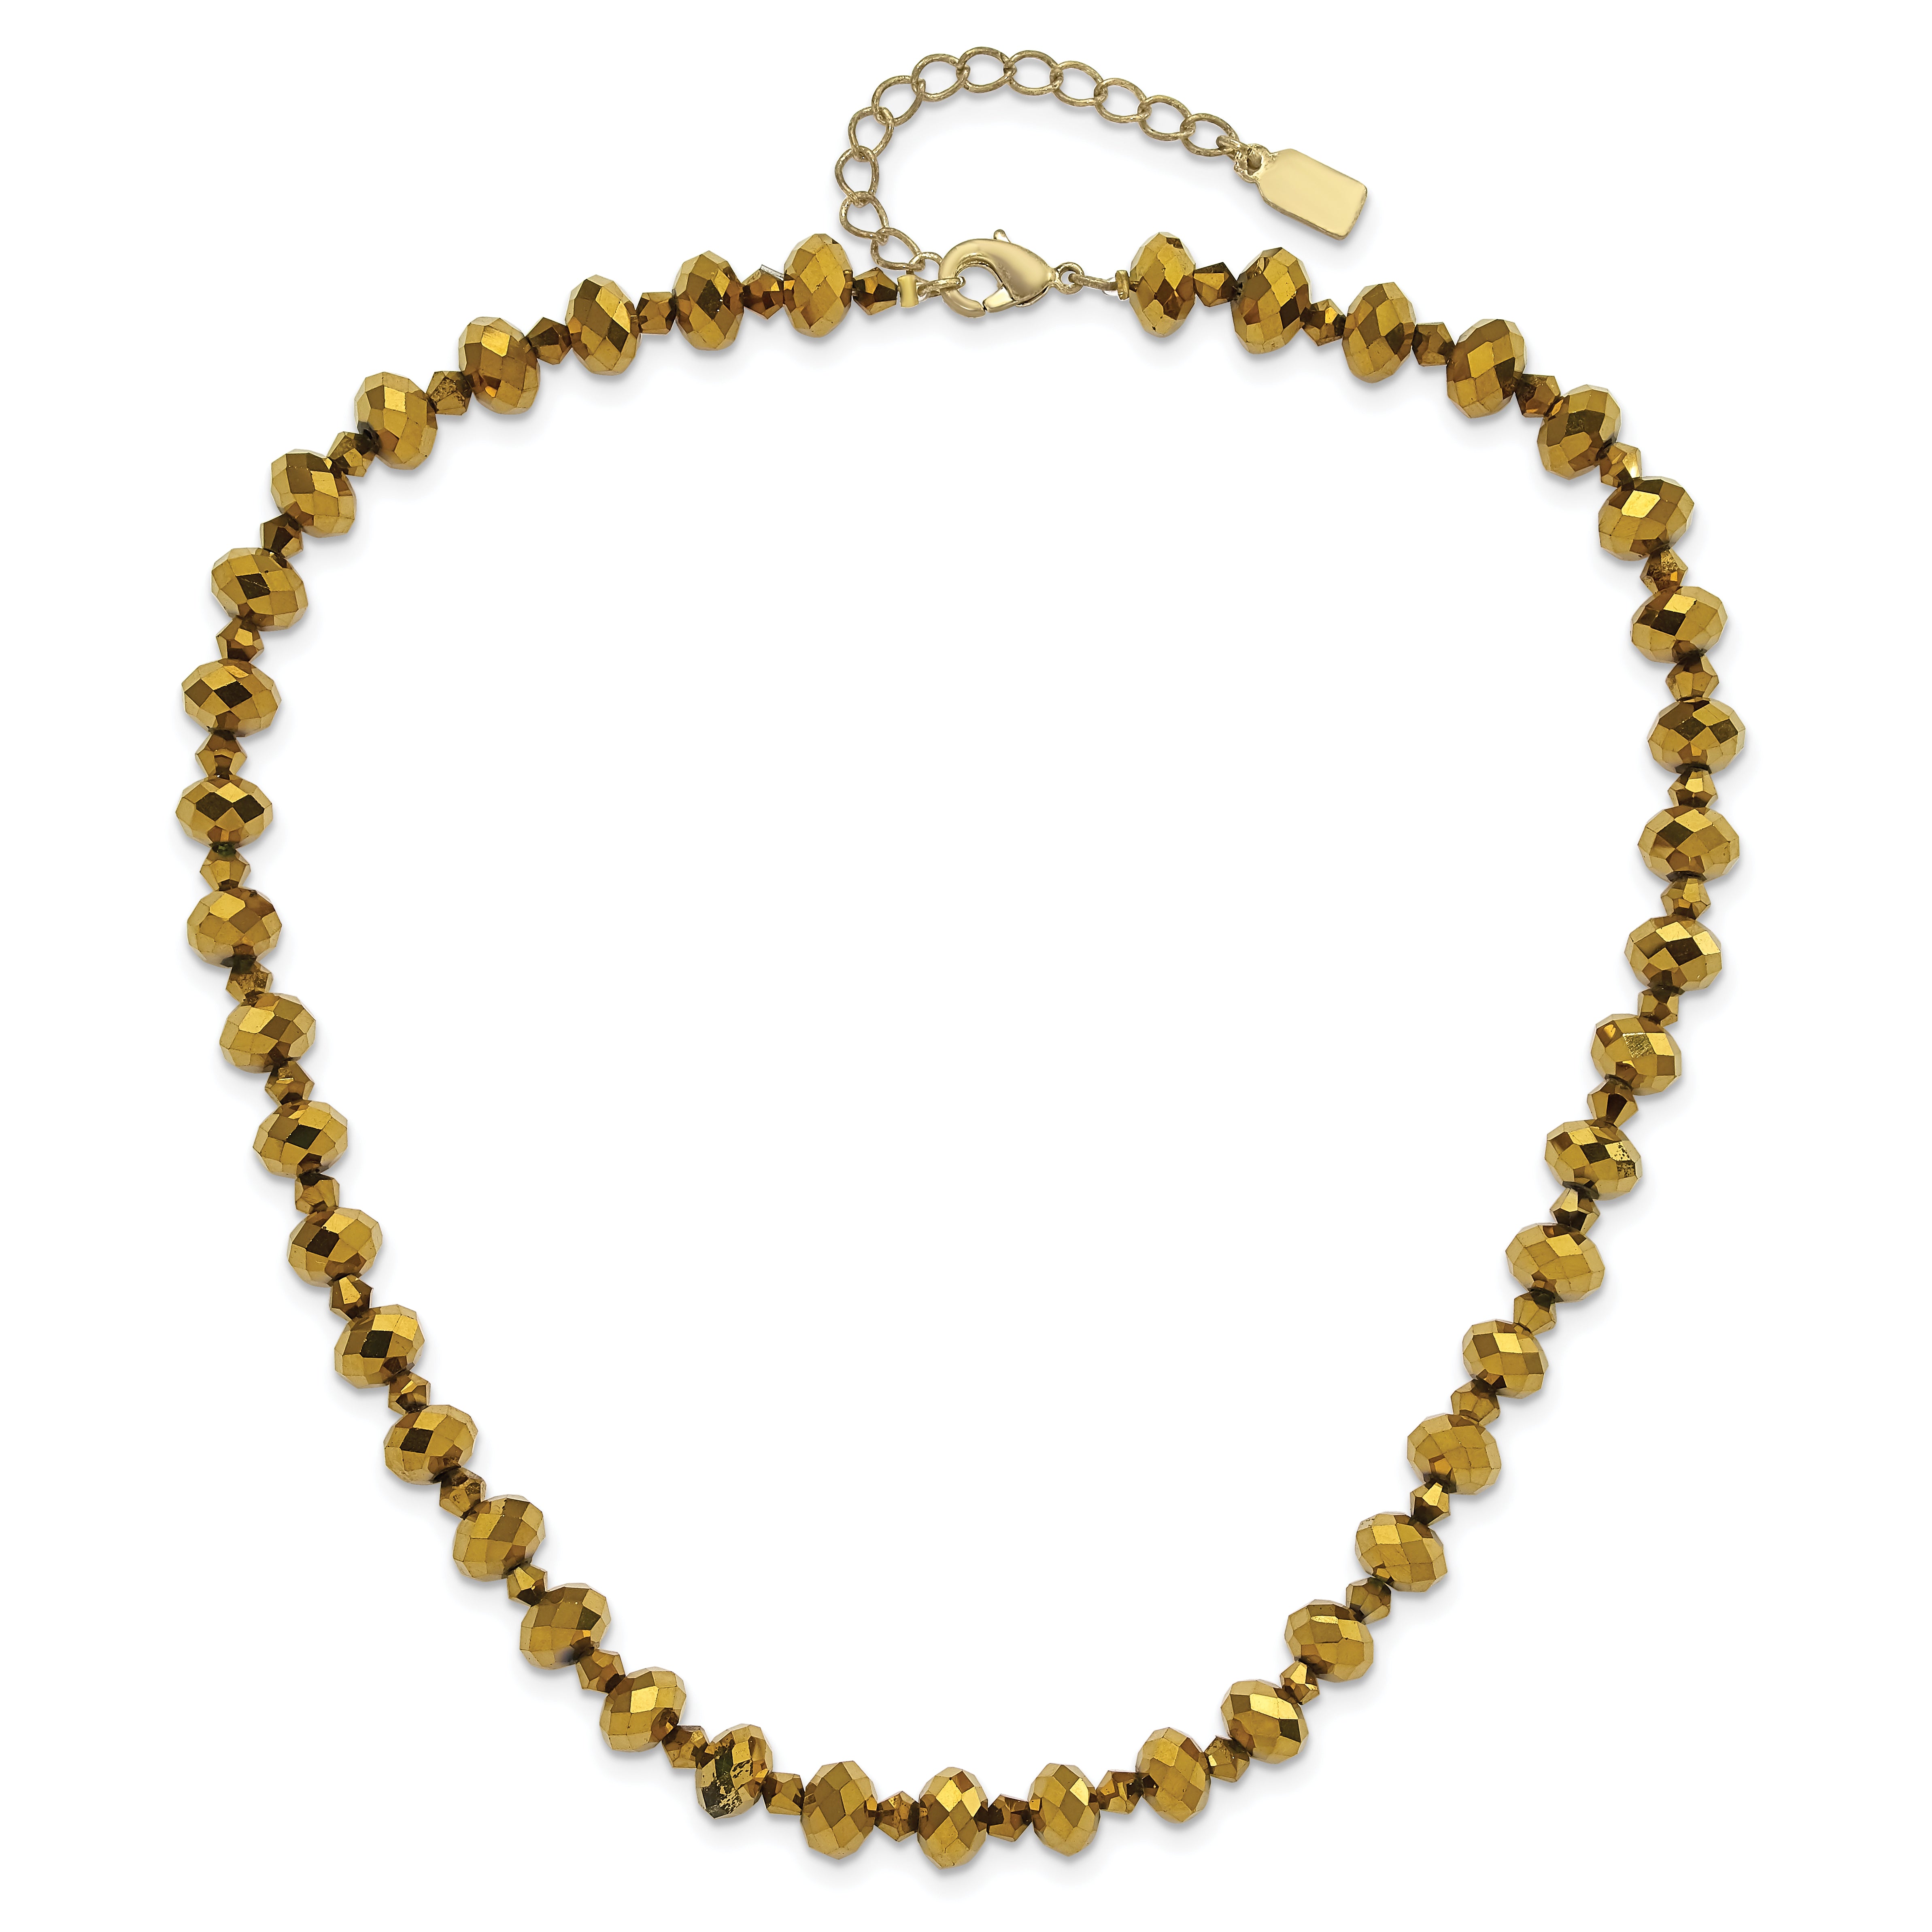 1928 Jewelry Brass-tone Light Colorado Faceted Glass Beads Adjustable 16 inch Necklace with 2 inch extension